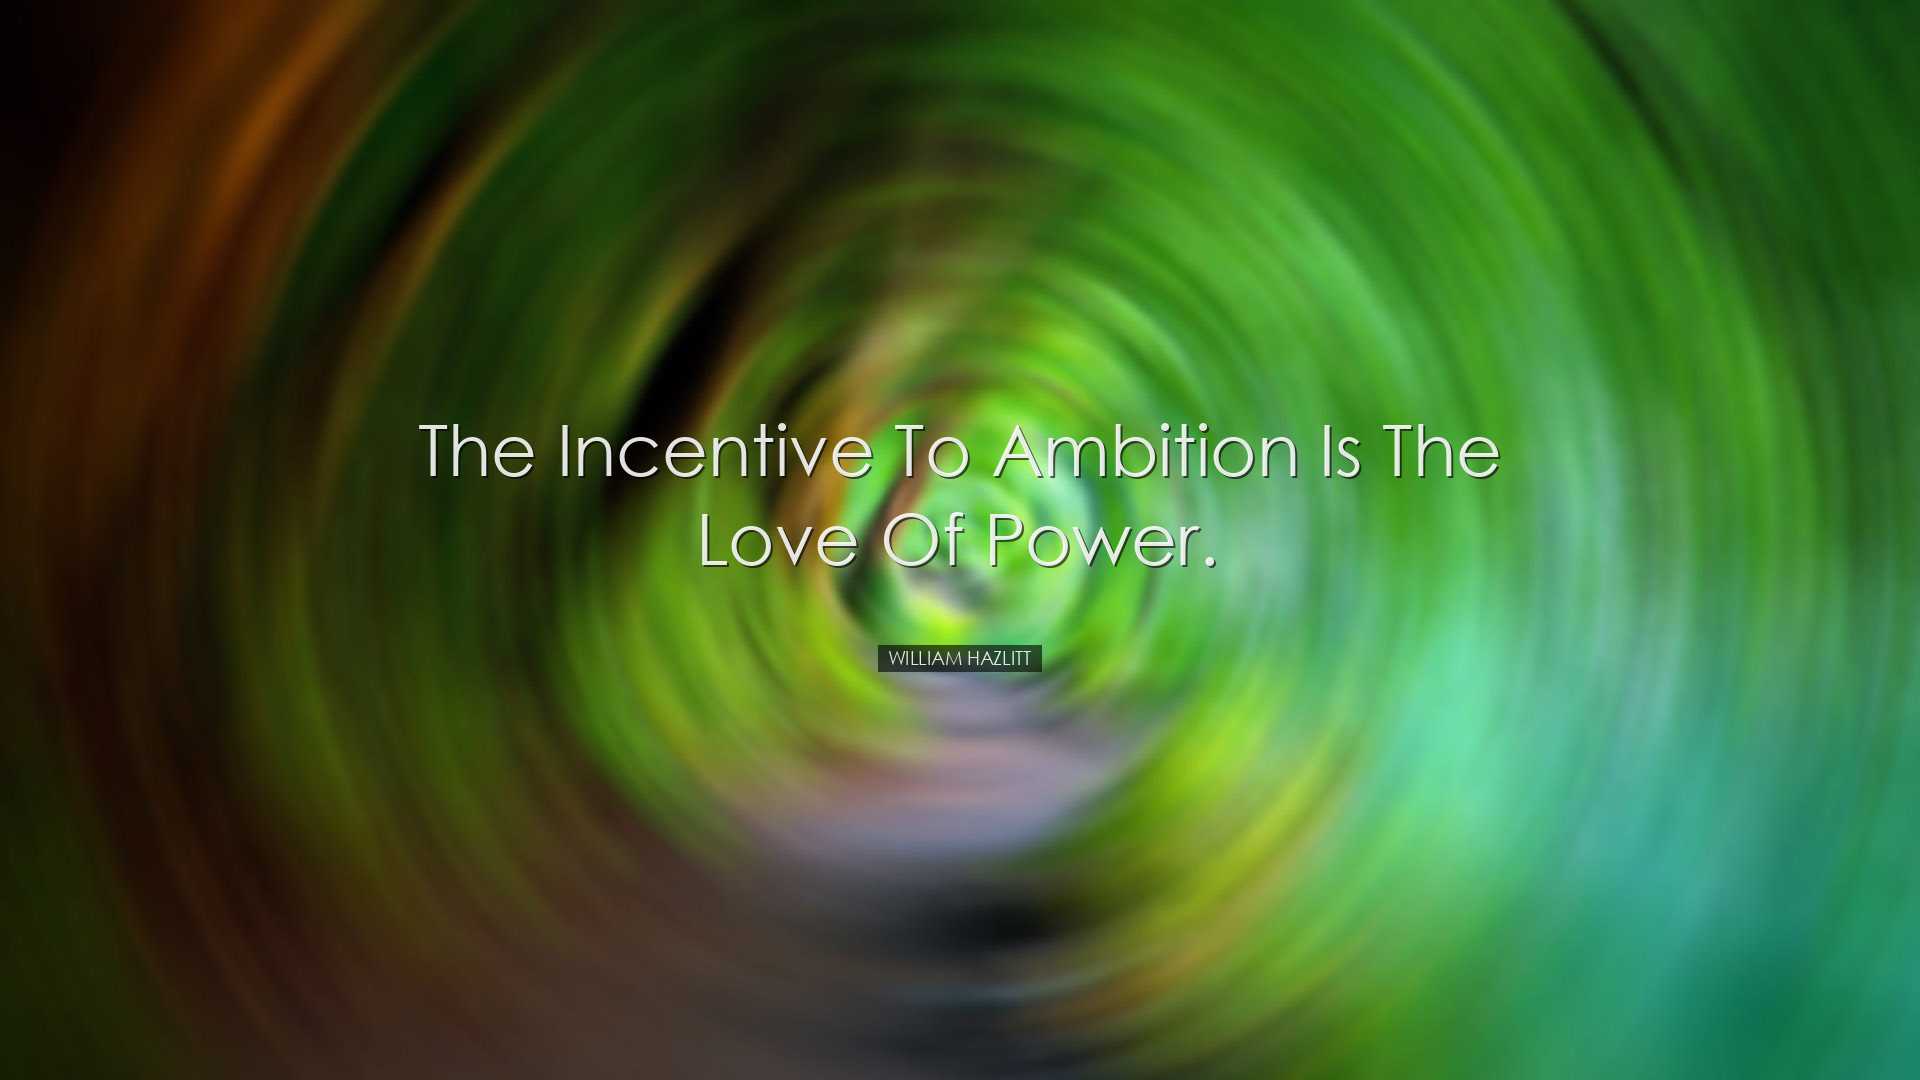 The incentive to ambition is the love of power. - William Hazlitt